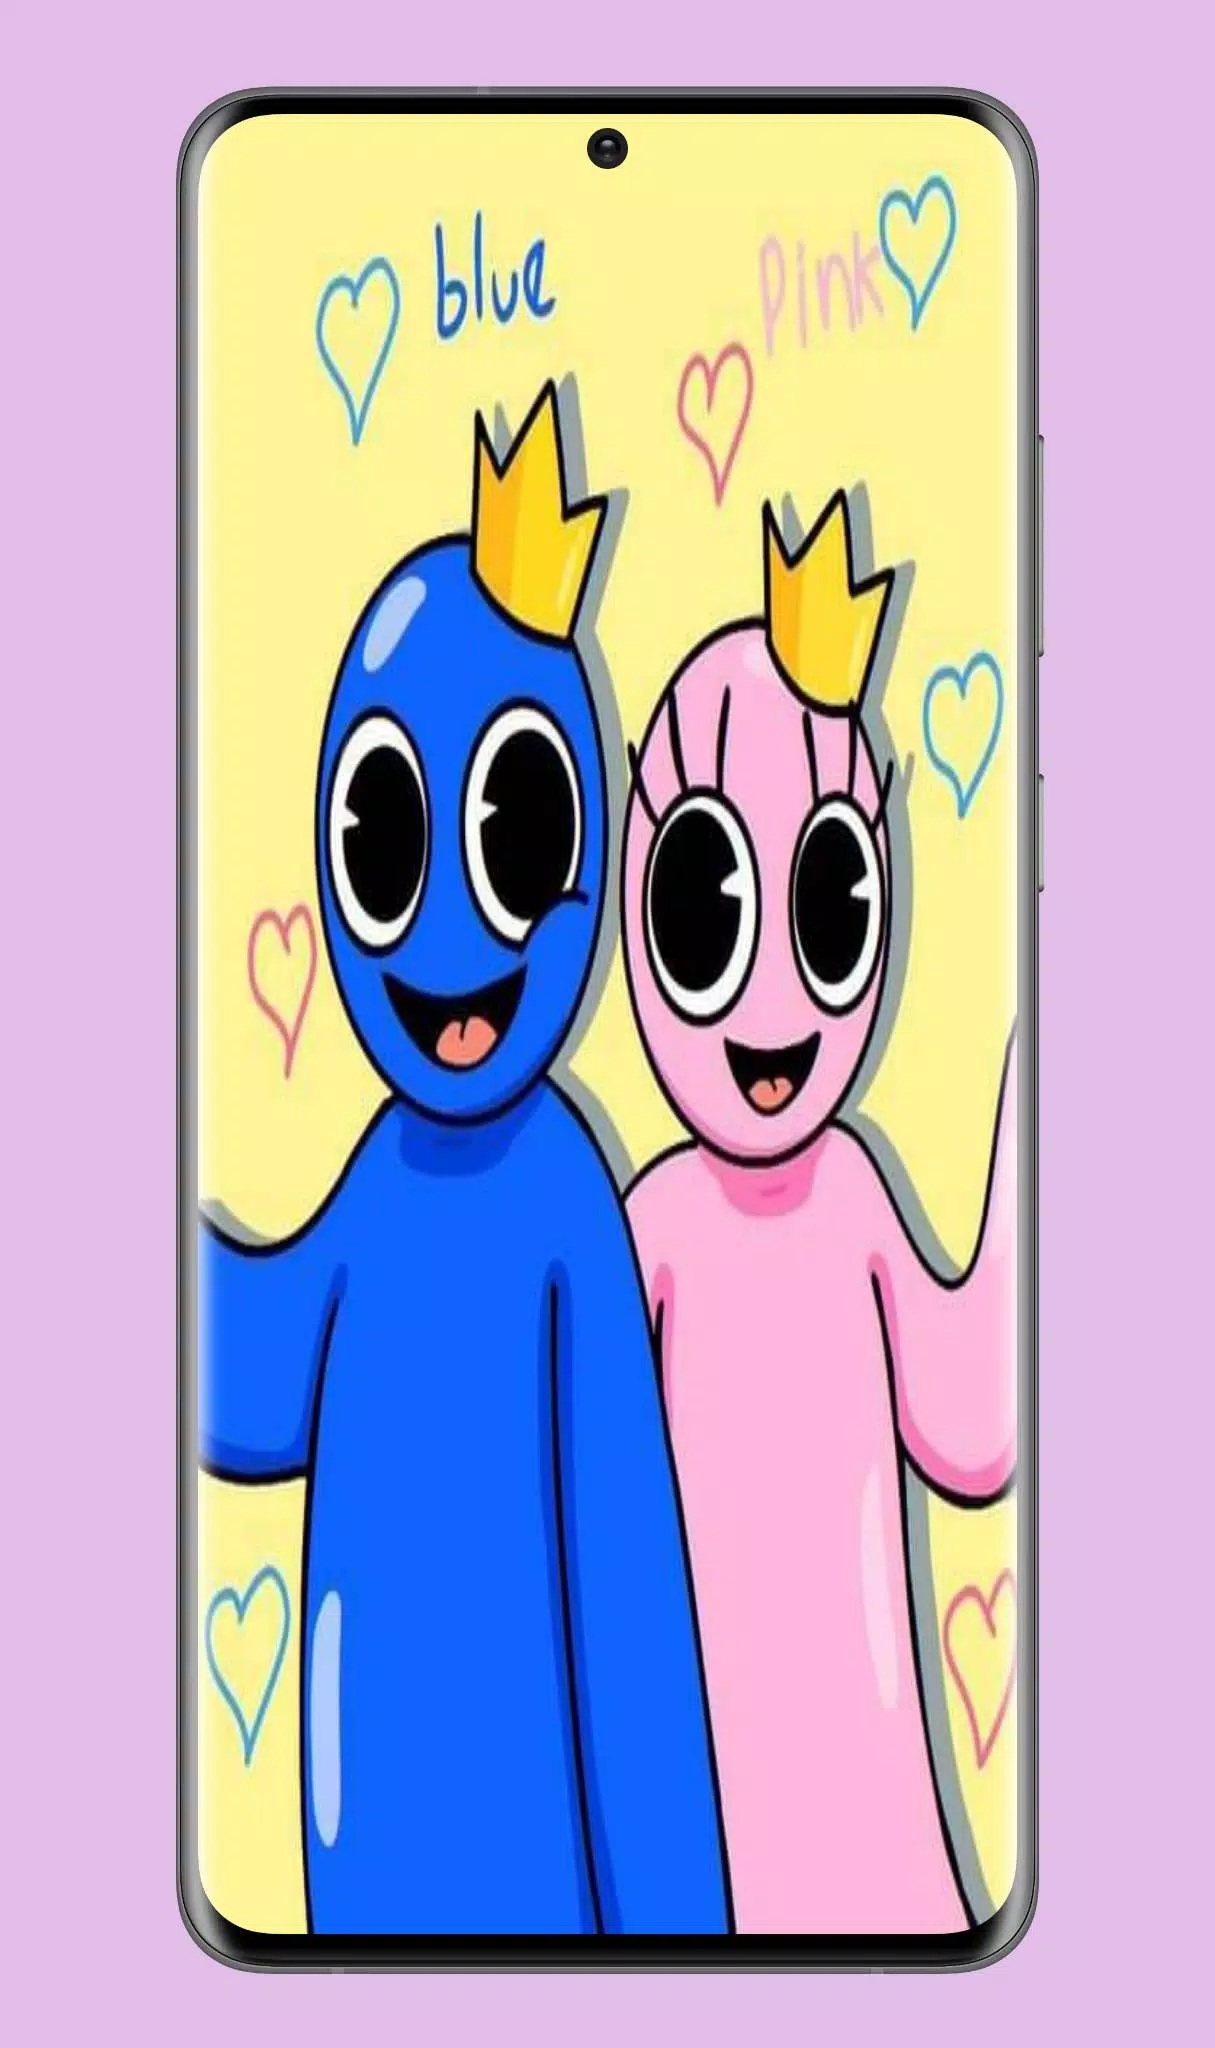 About: Wallpaper for Rainbow Friends (Google Play version)